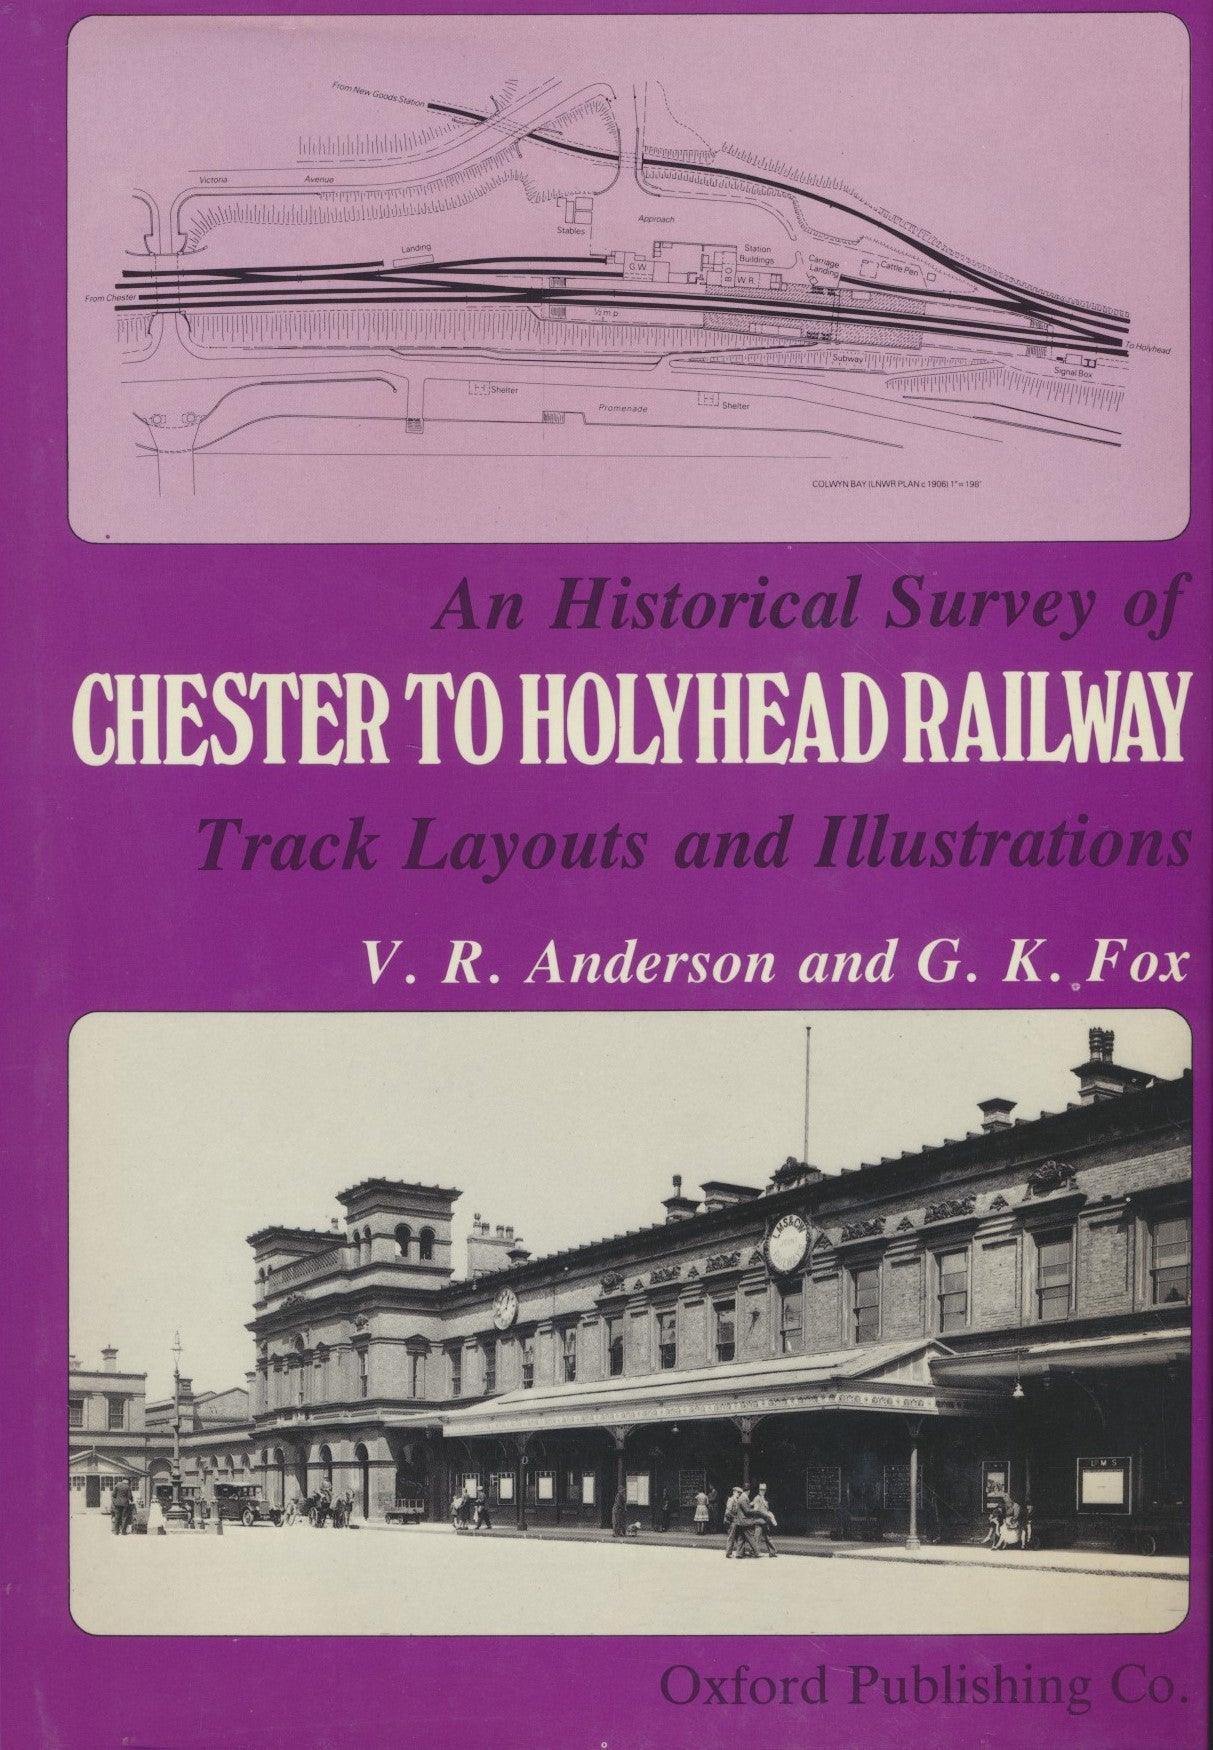 An Historical Survey of the Chester to Holyhead Railway